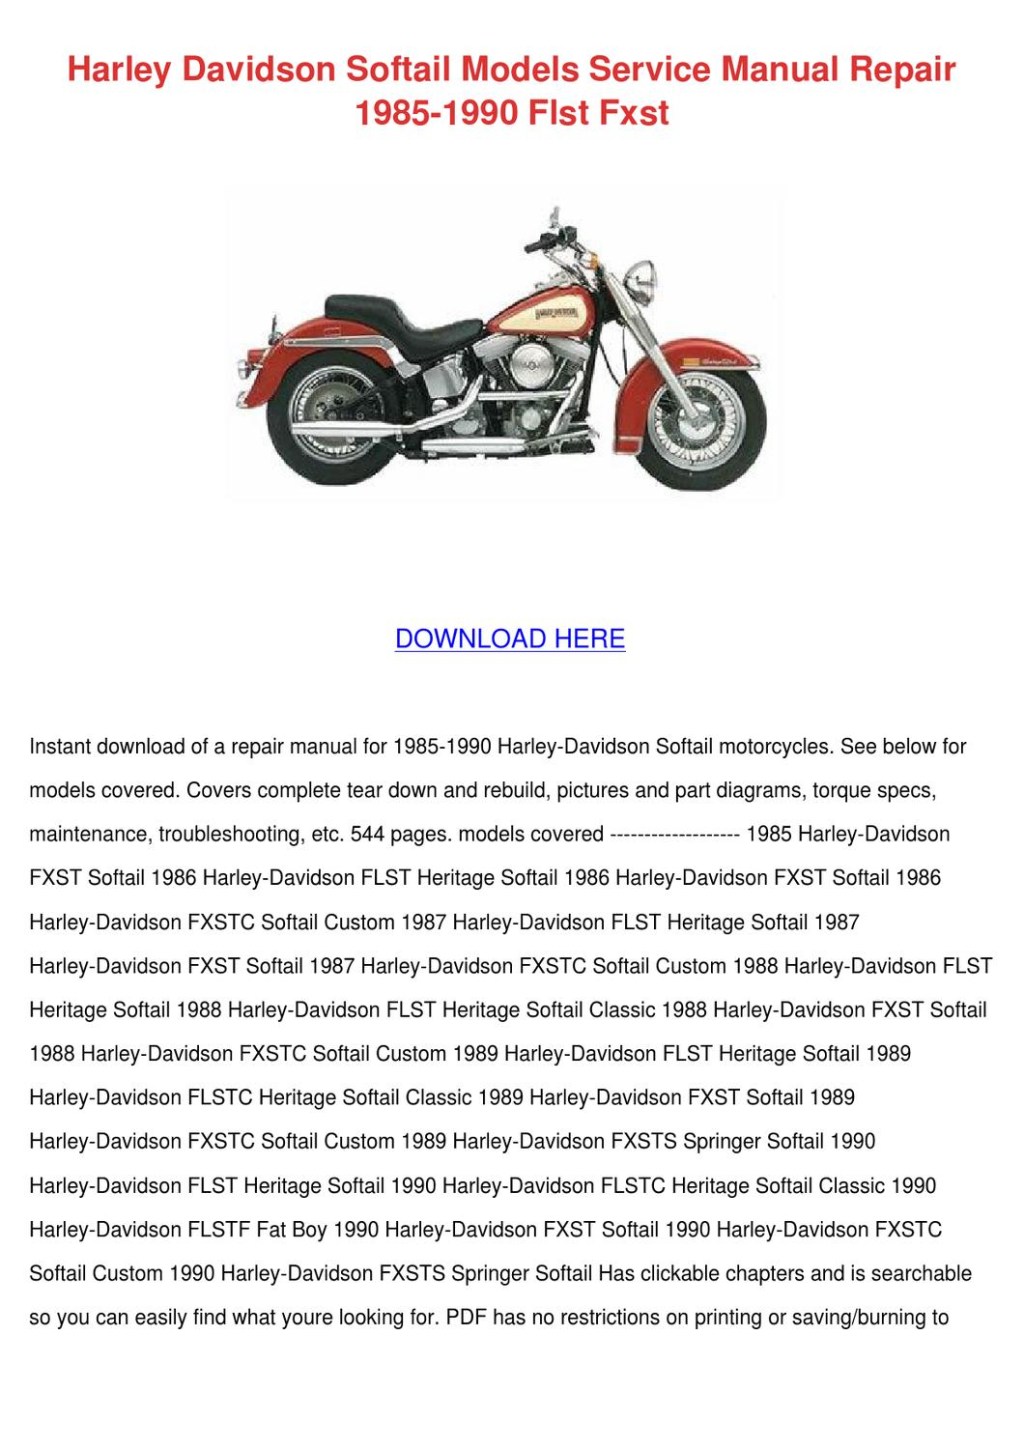 Picture of: Harley Davidson Softail Models Service Manual by KareemGomez – Issuu